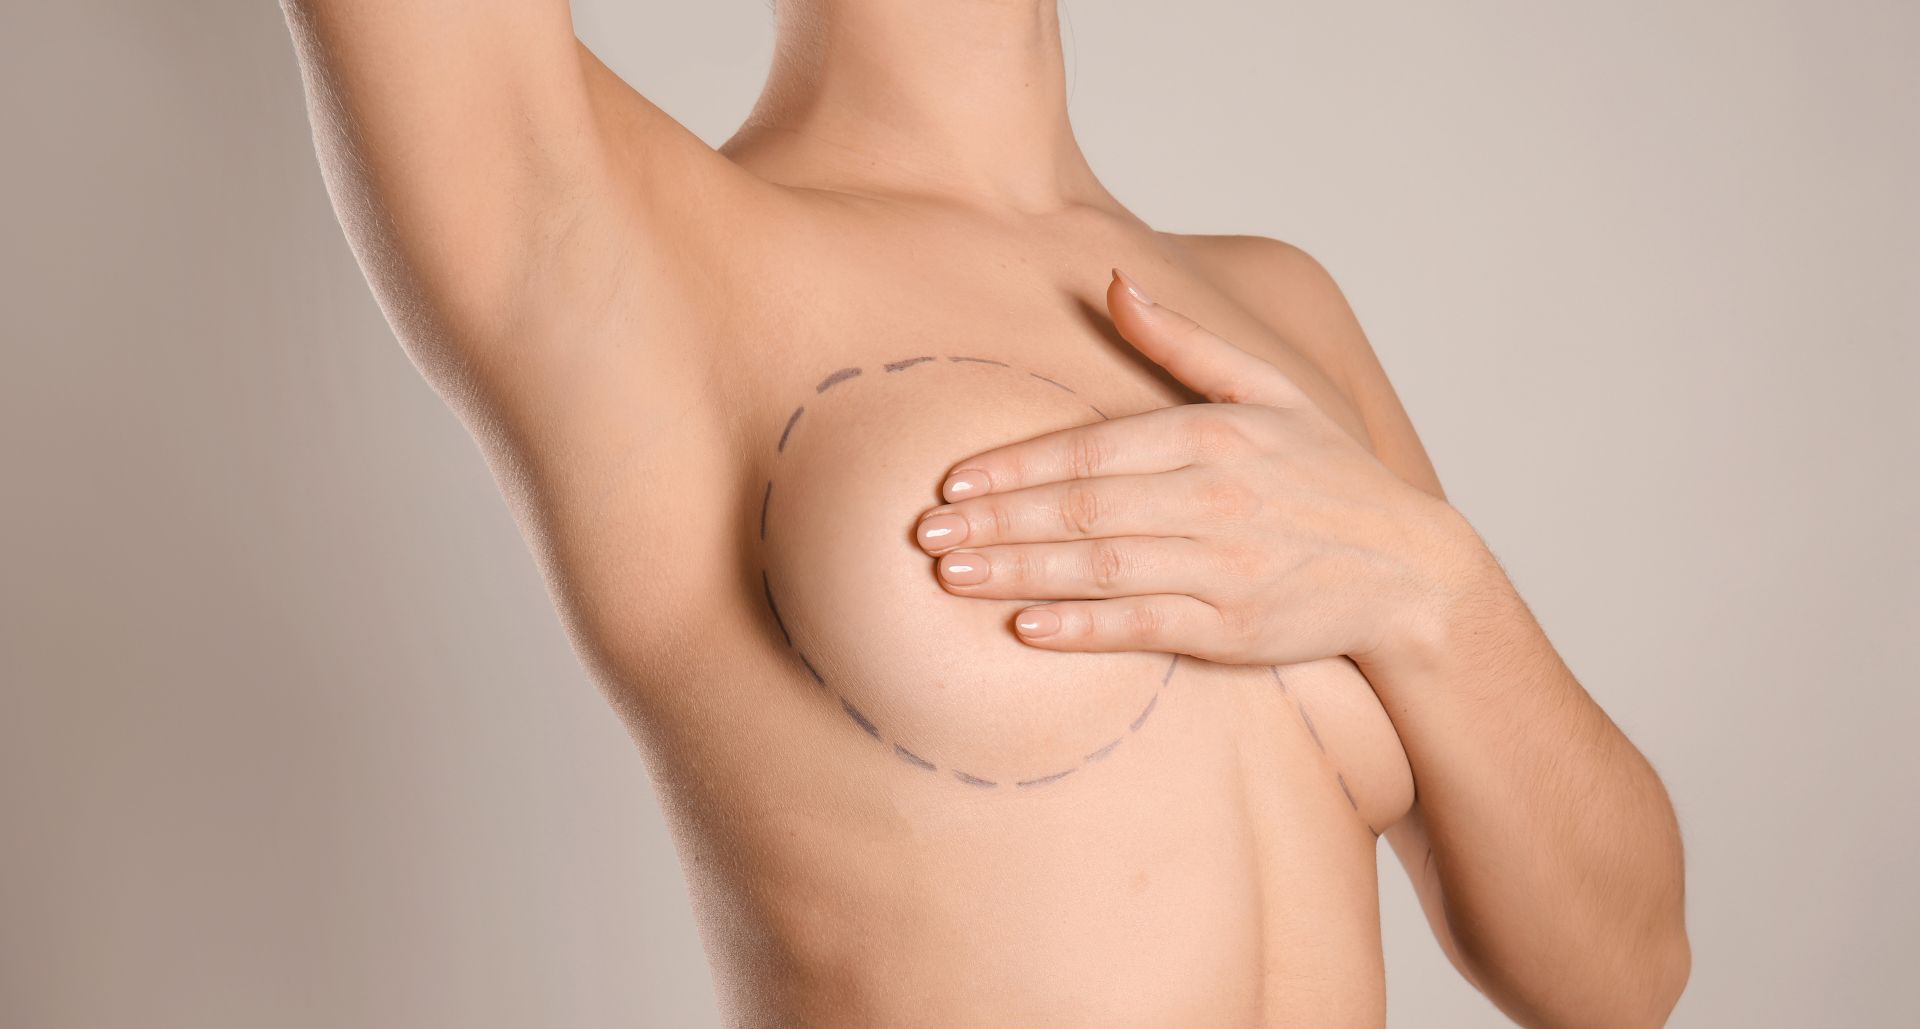 Young Woman with Marks on Breast for Cosmetic Surgery Operation